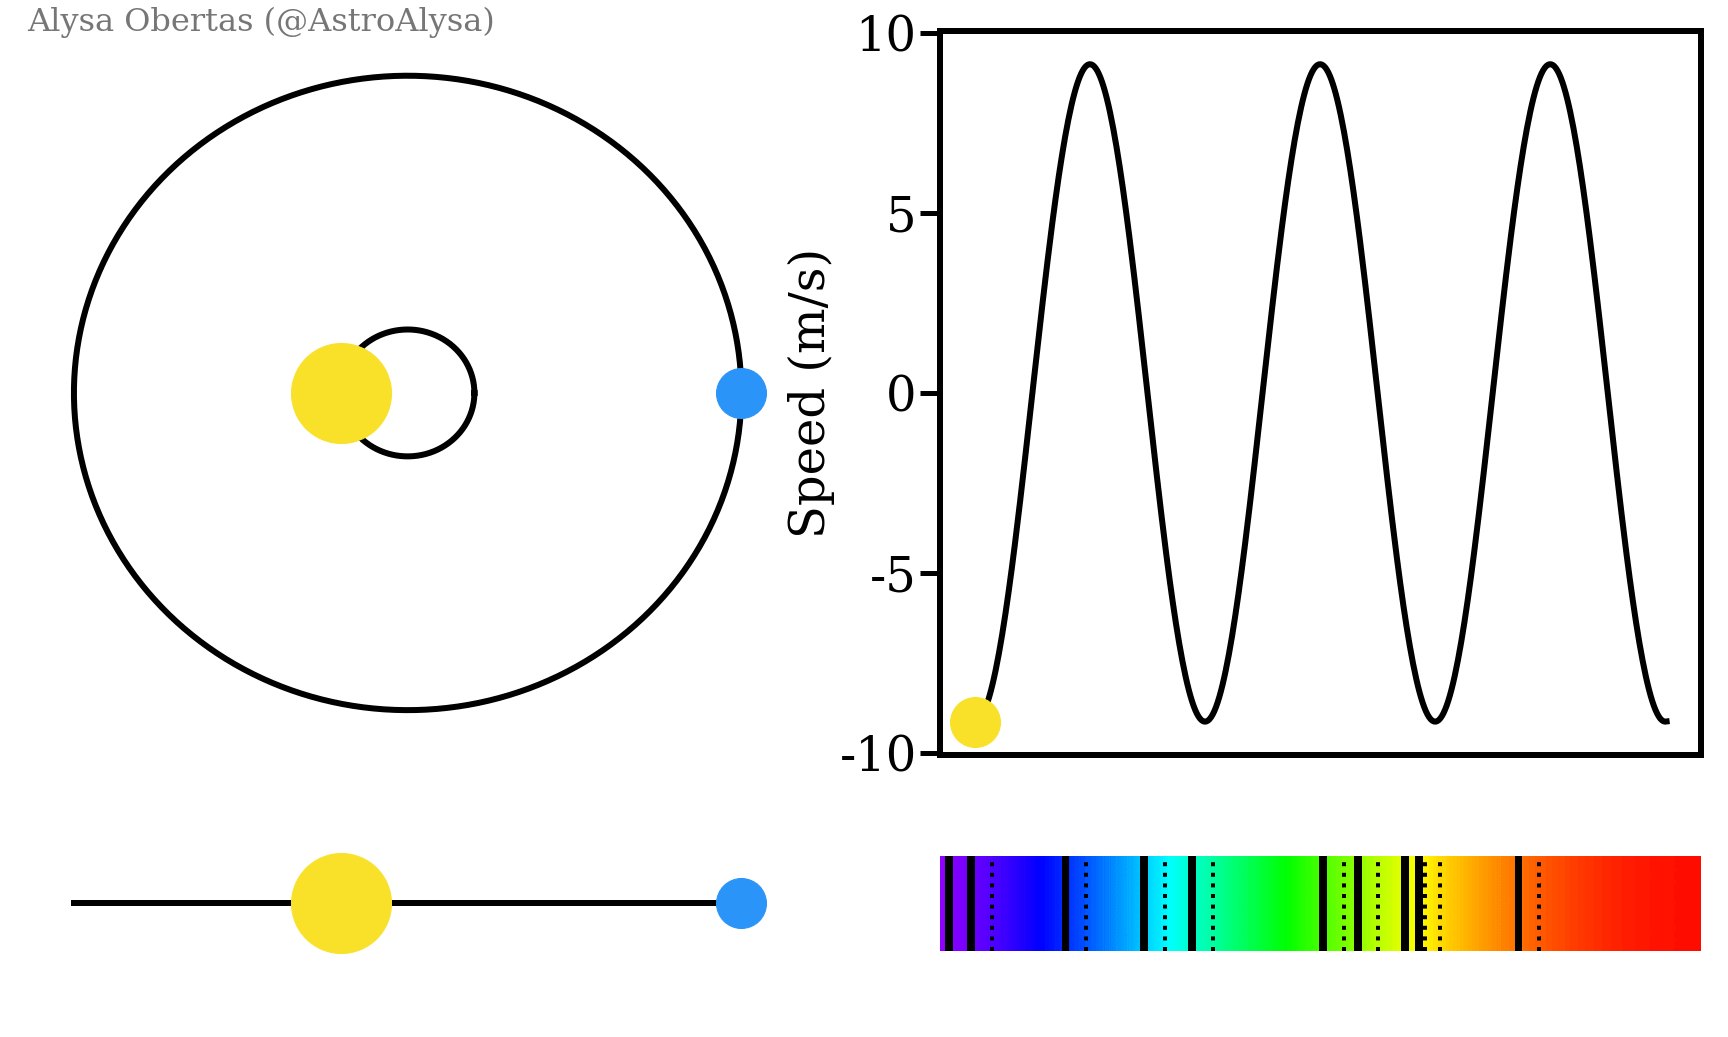 We can see how the spectrum of an object shifts as an object moves toward or away from us. https://commons.wikimedia.org/wiki/File:Radial_velocity_doppler_spectroscopy.gif